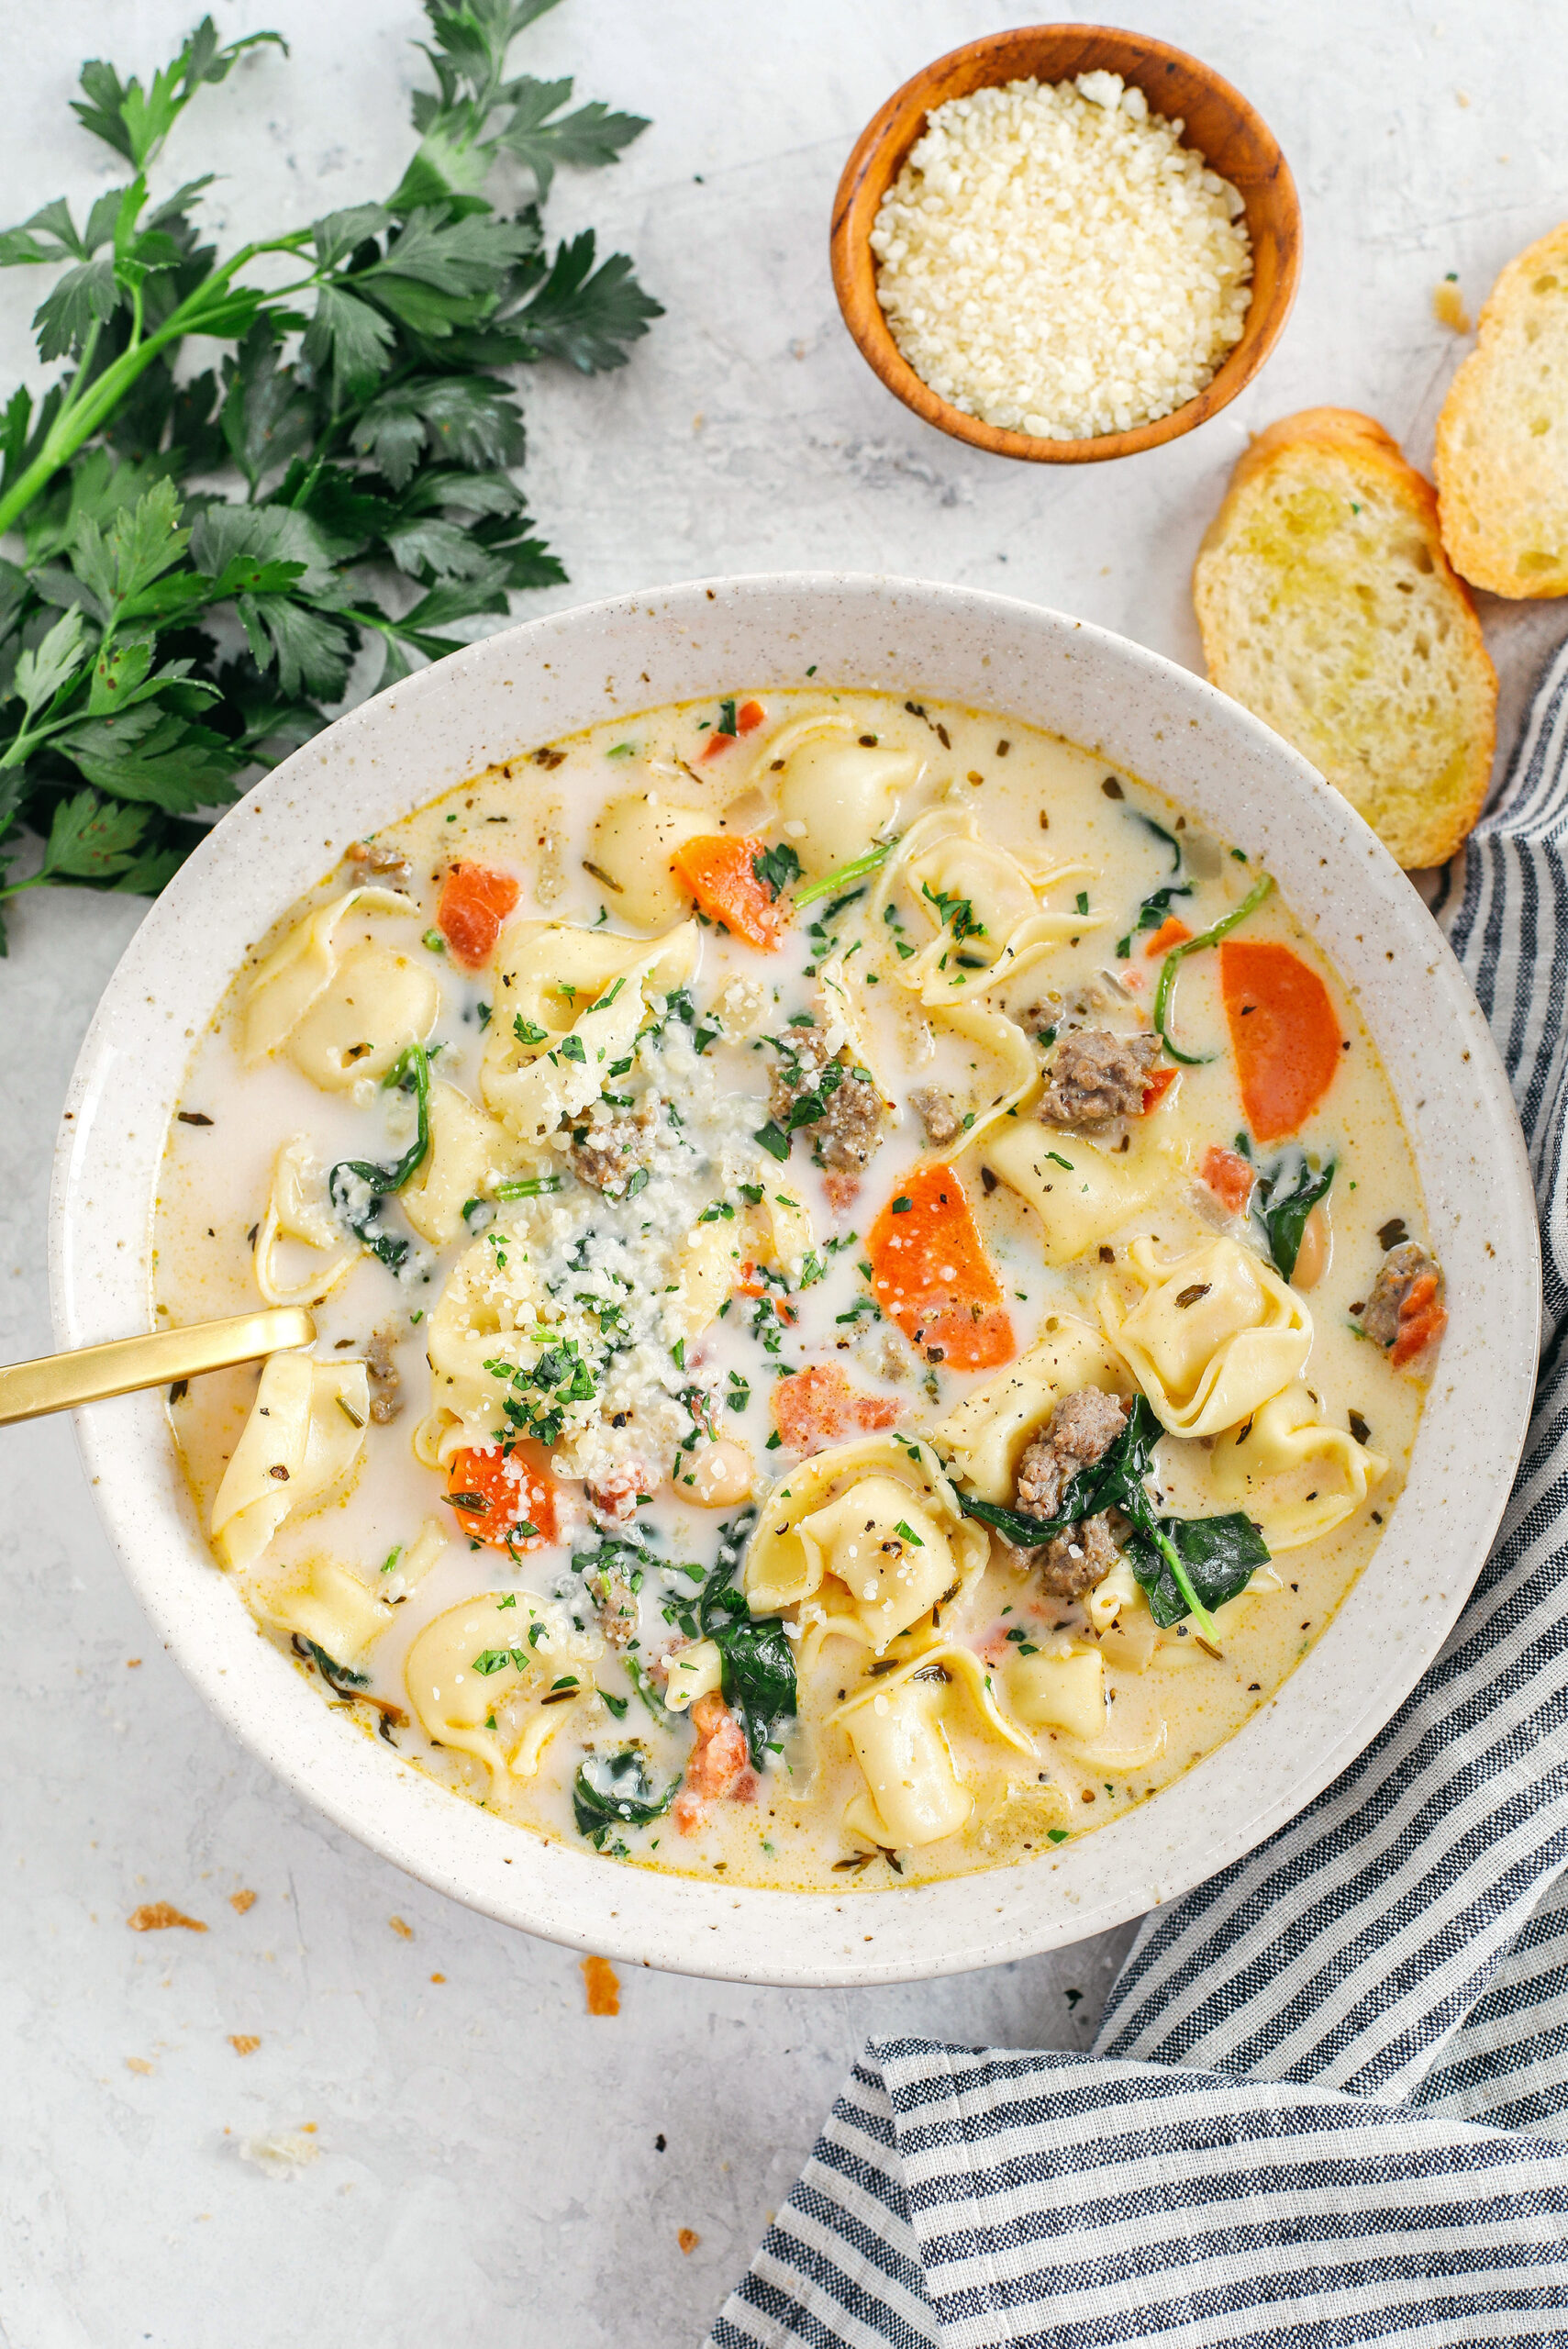 This Creamy Sausage & Spinach Tortellini Soup is delicious, loaded with veggies and makes the perfect cozy meal that can easily be made in your instant pot, slow cooker or right on the stove!